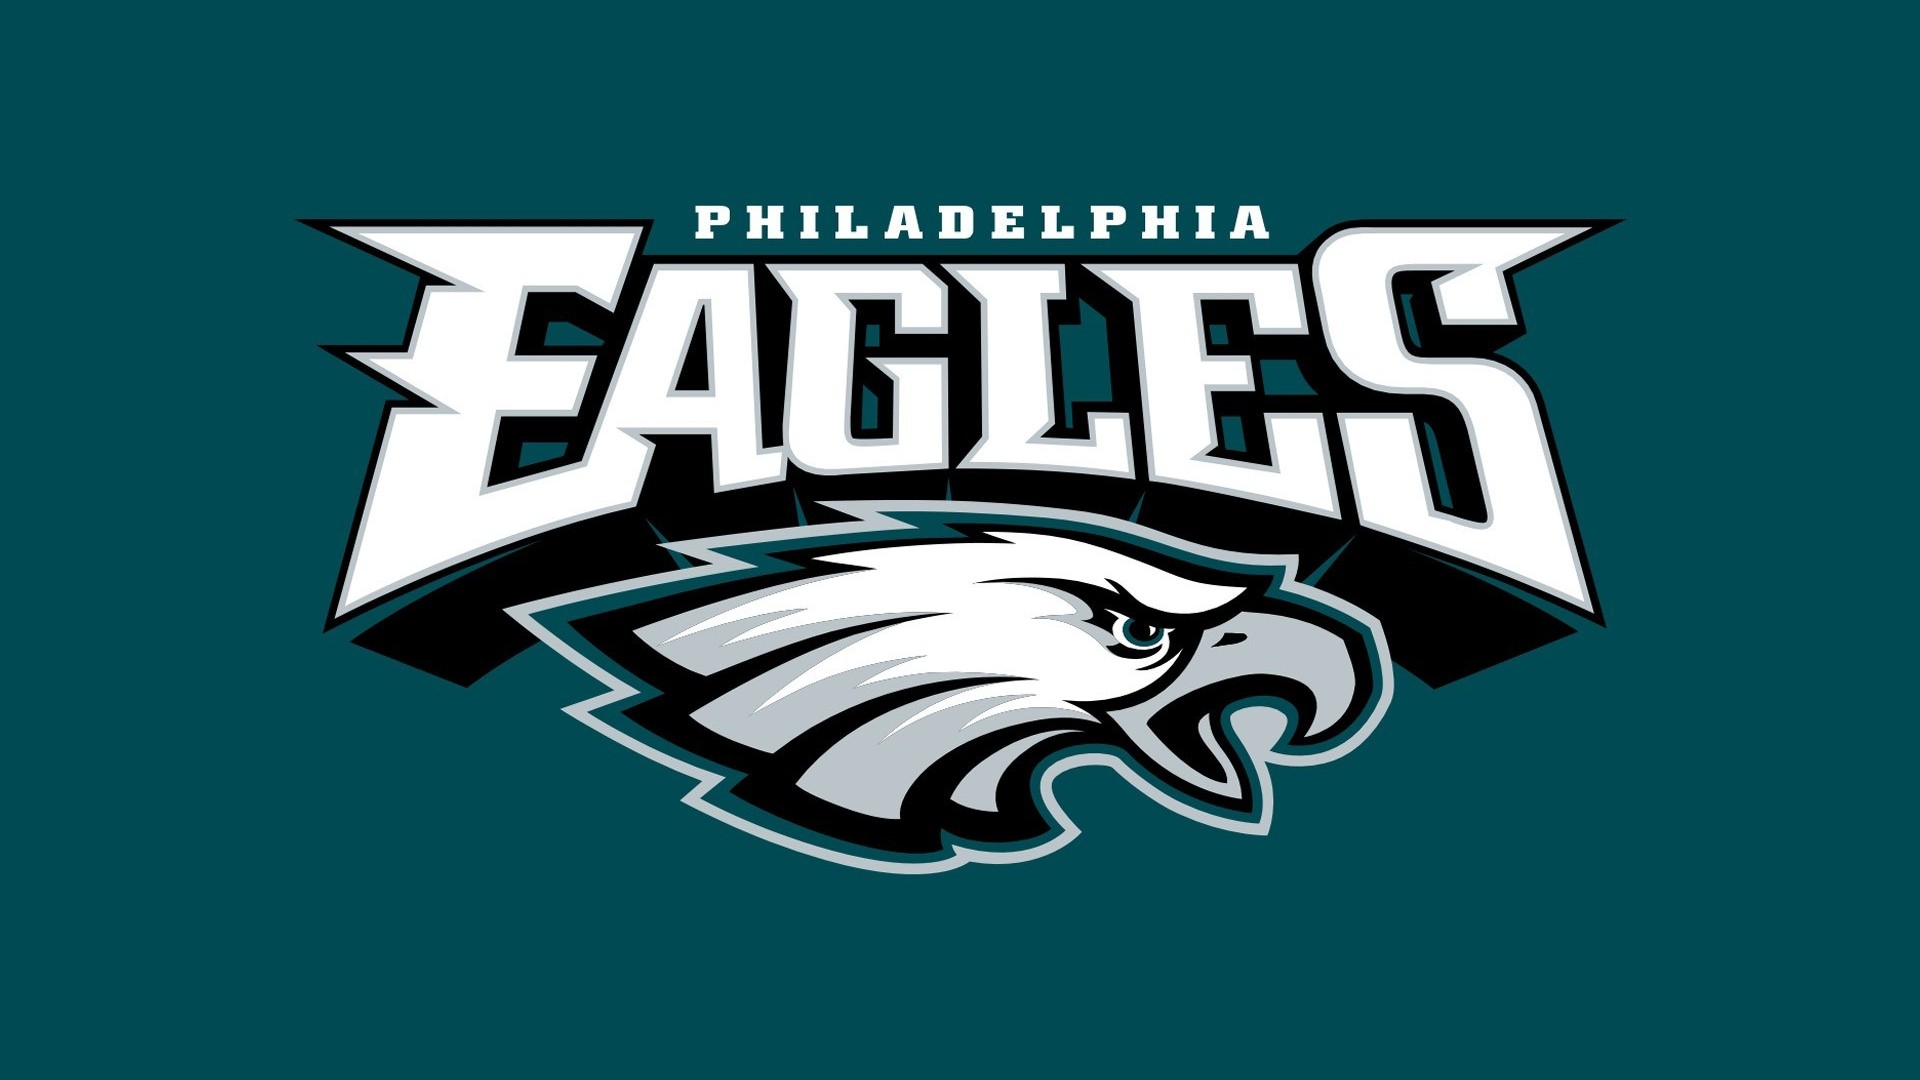 Backgrounds The Eagles HD With Resolution 1920X1080 pixel. You can make this wallpaper for your Mac or Windows Desktop Background, iPhone, Android or Tablet and another Smartphone device for free